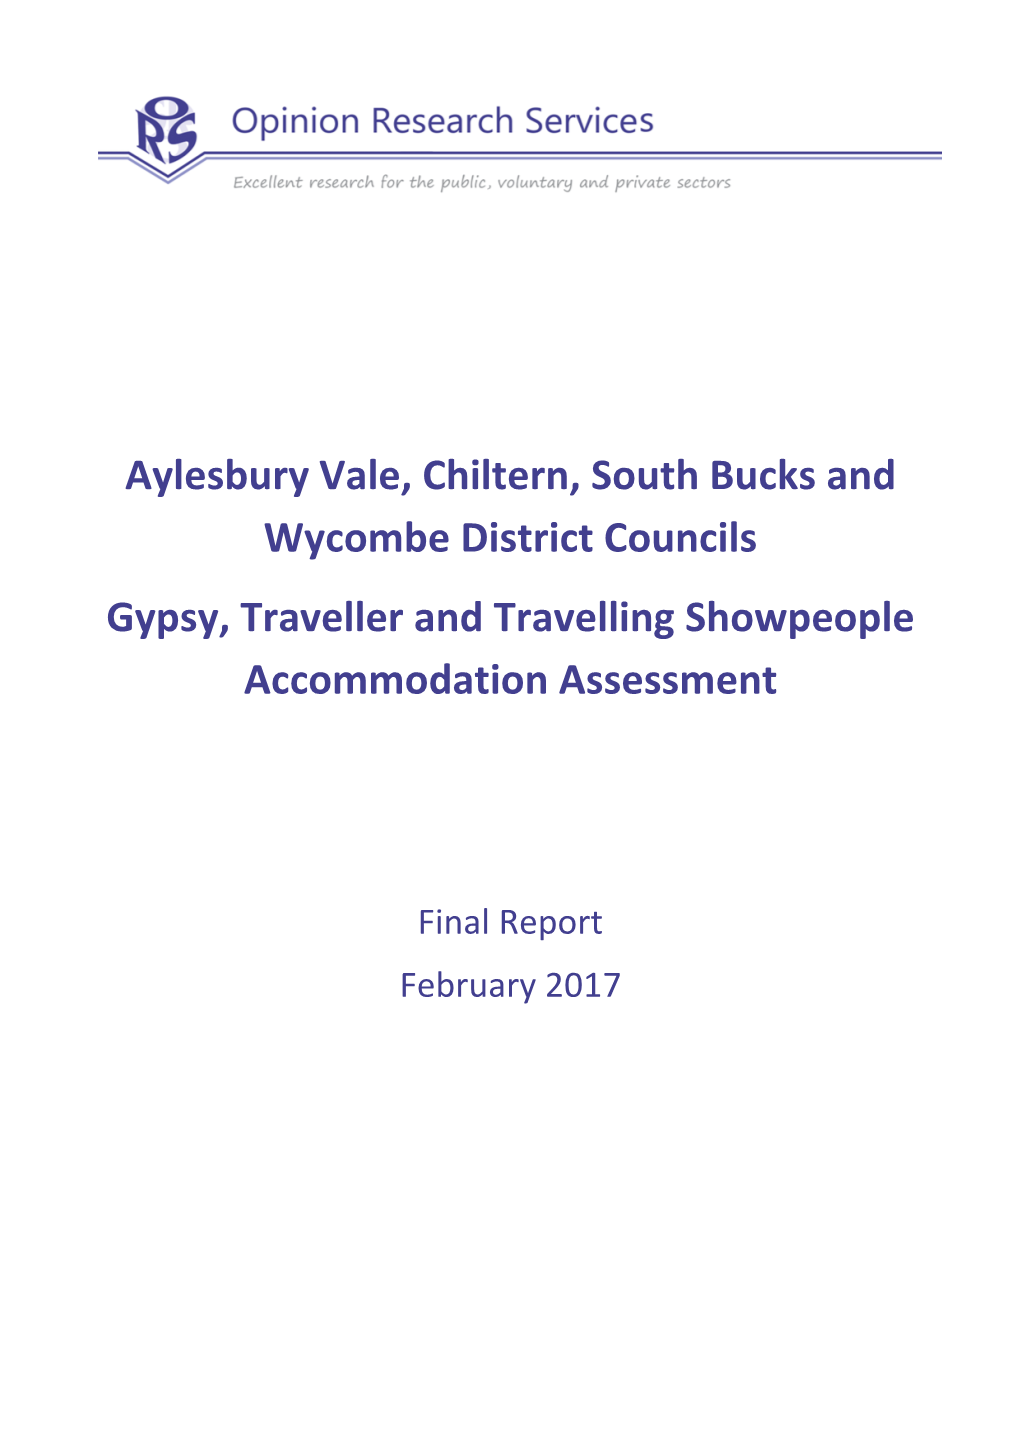 Aylesbury Vale, Chiltern, South Bucks and Wycombe District Councils Gypsy, Traveller and Travelling Showpeople Accommodation Assessment